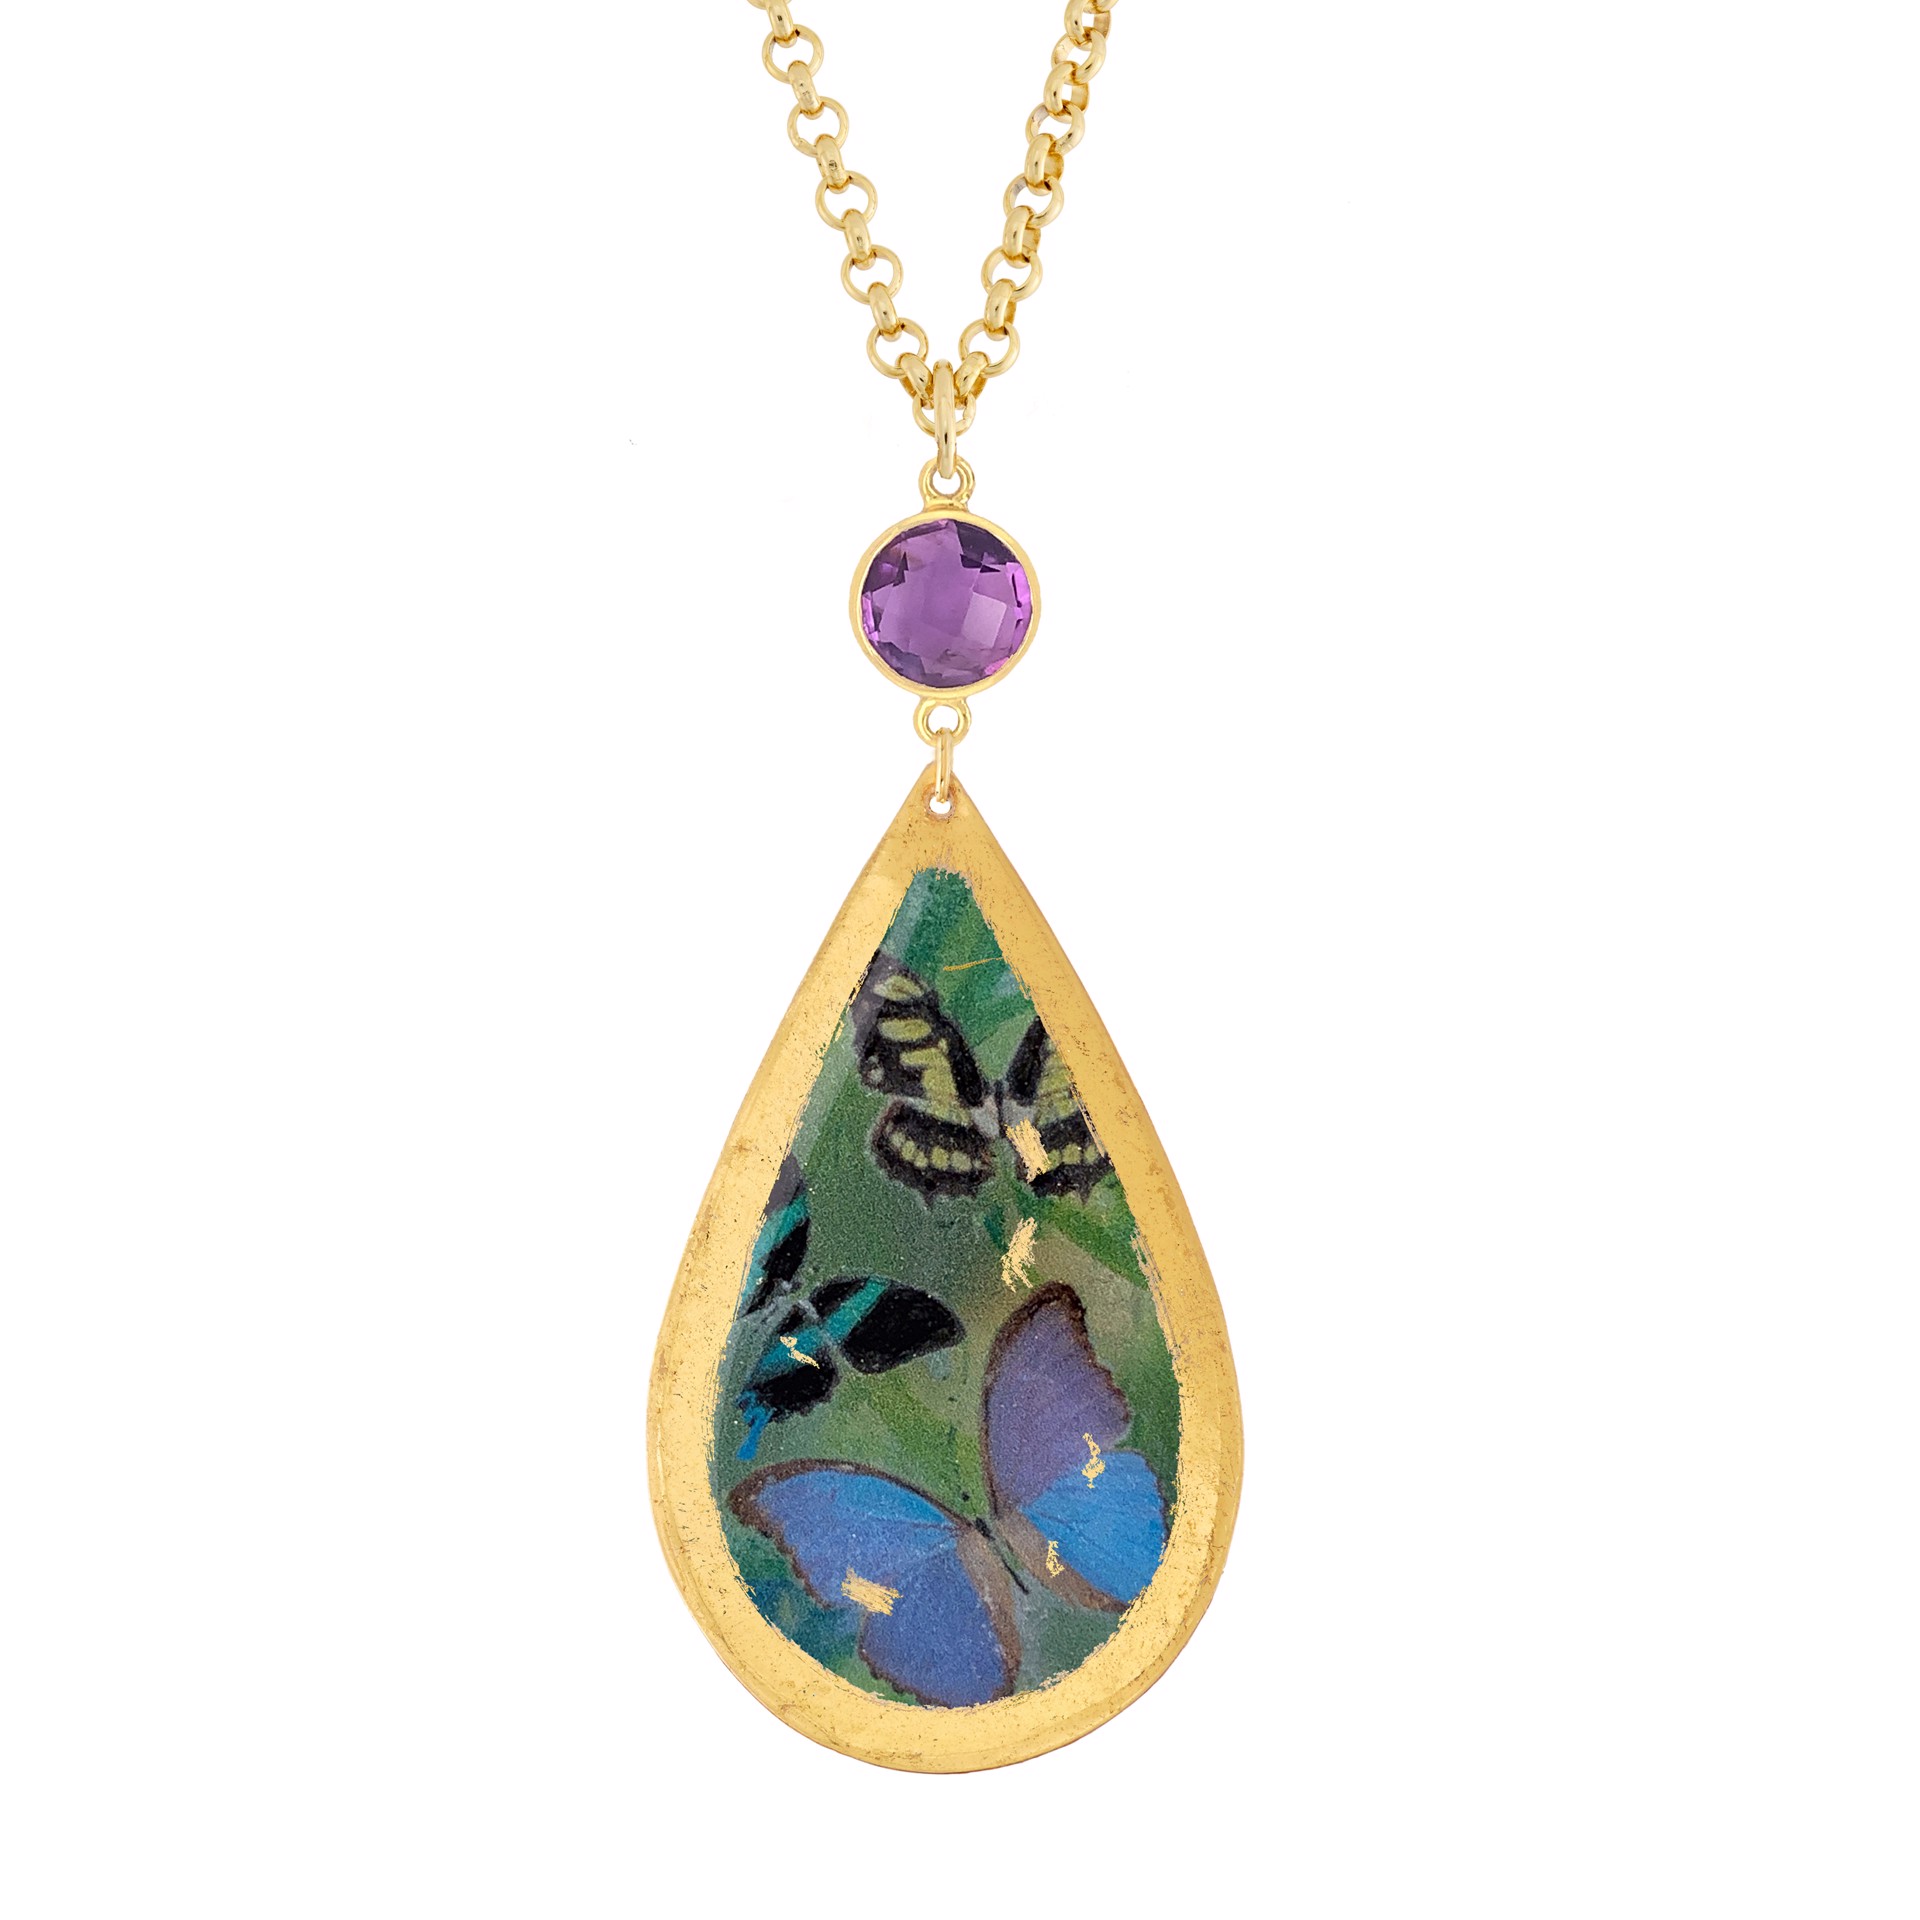 Wanderers Large Teardrop Pendant Necklace with Amethyst 17" - Gold - Small Belcher by Evocateur